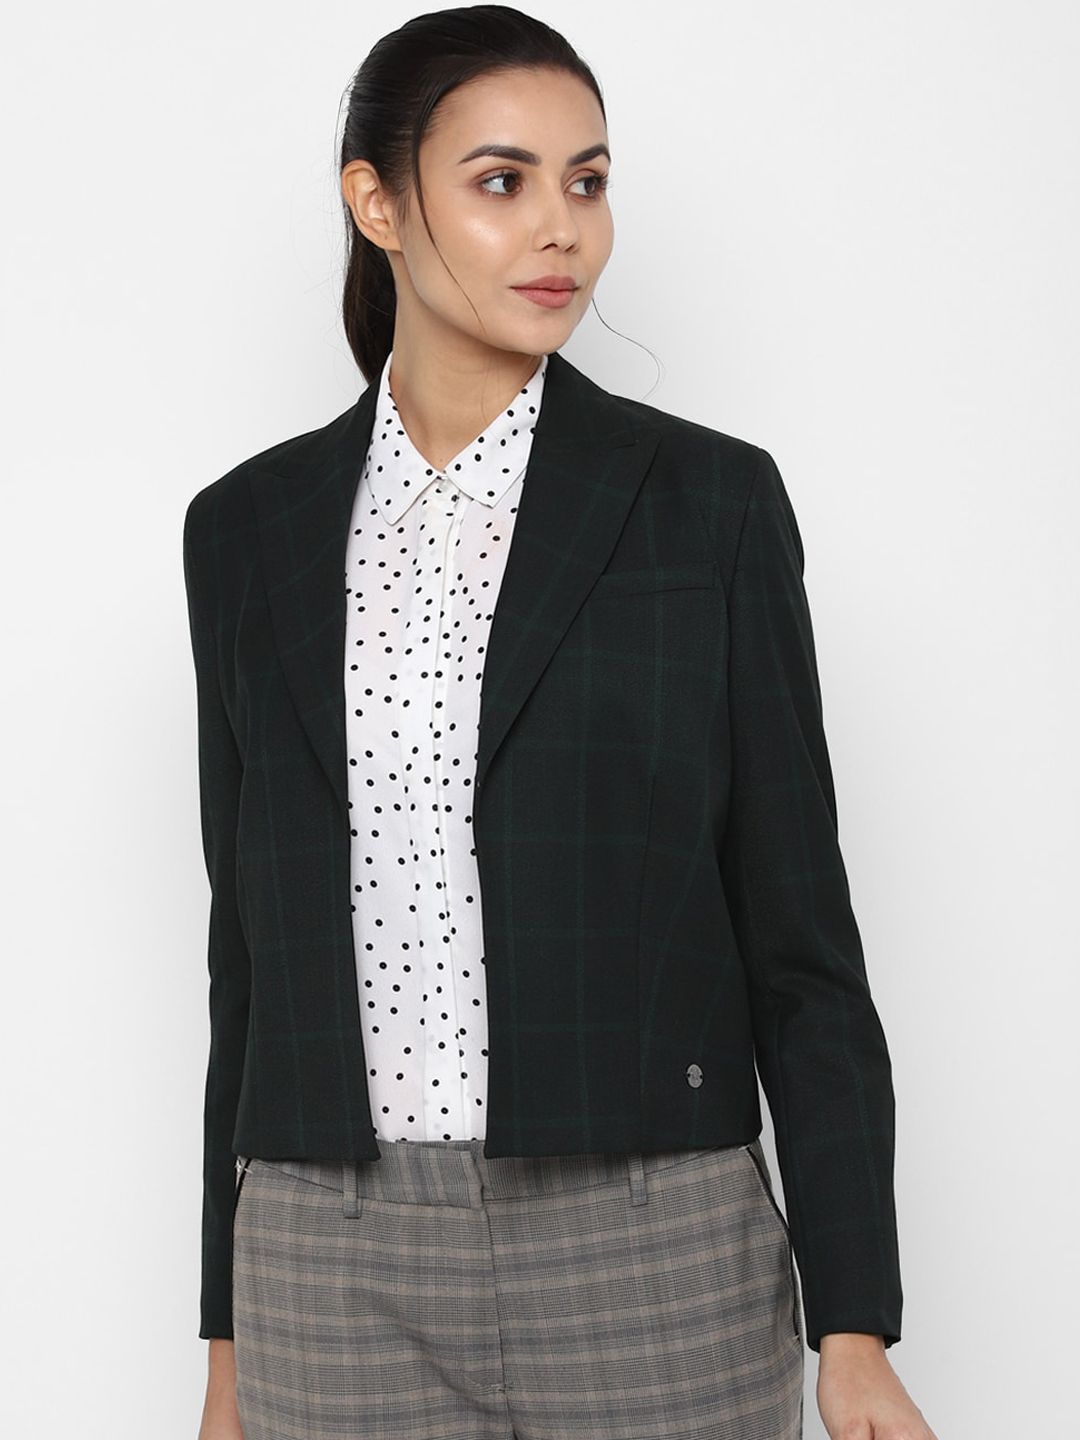 Allen Solly Woman Women Black Geometric Checked Tailored Fit Blazer Price in India